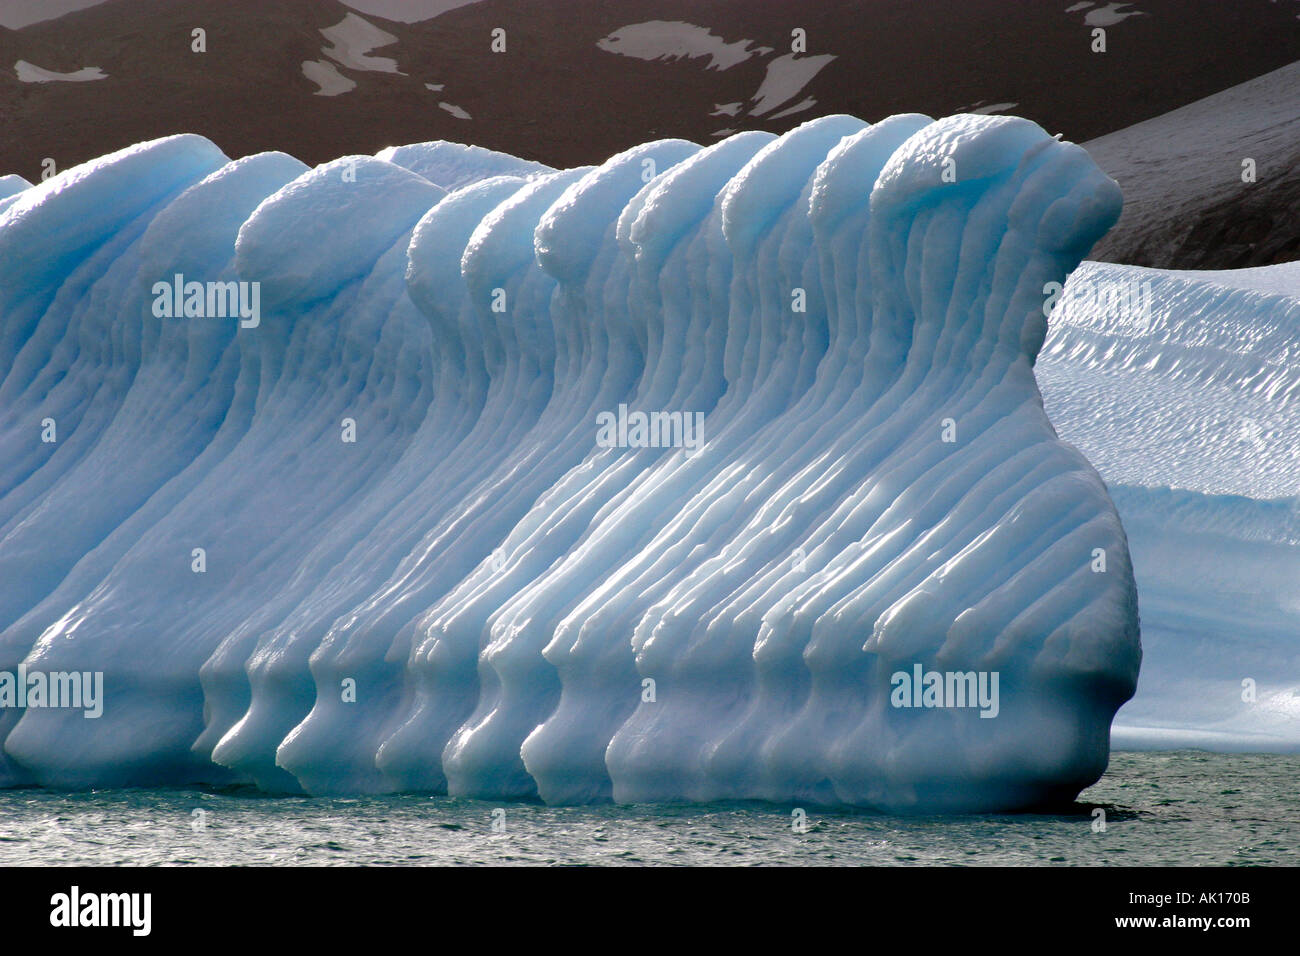 Exquisitely molded iceberg like a line of soldiers on parade,Antarctica, Stock Photo